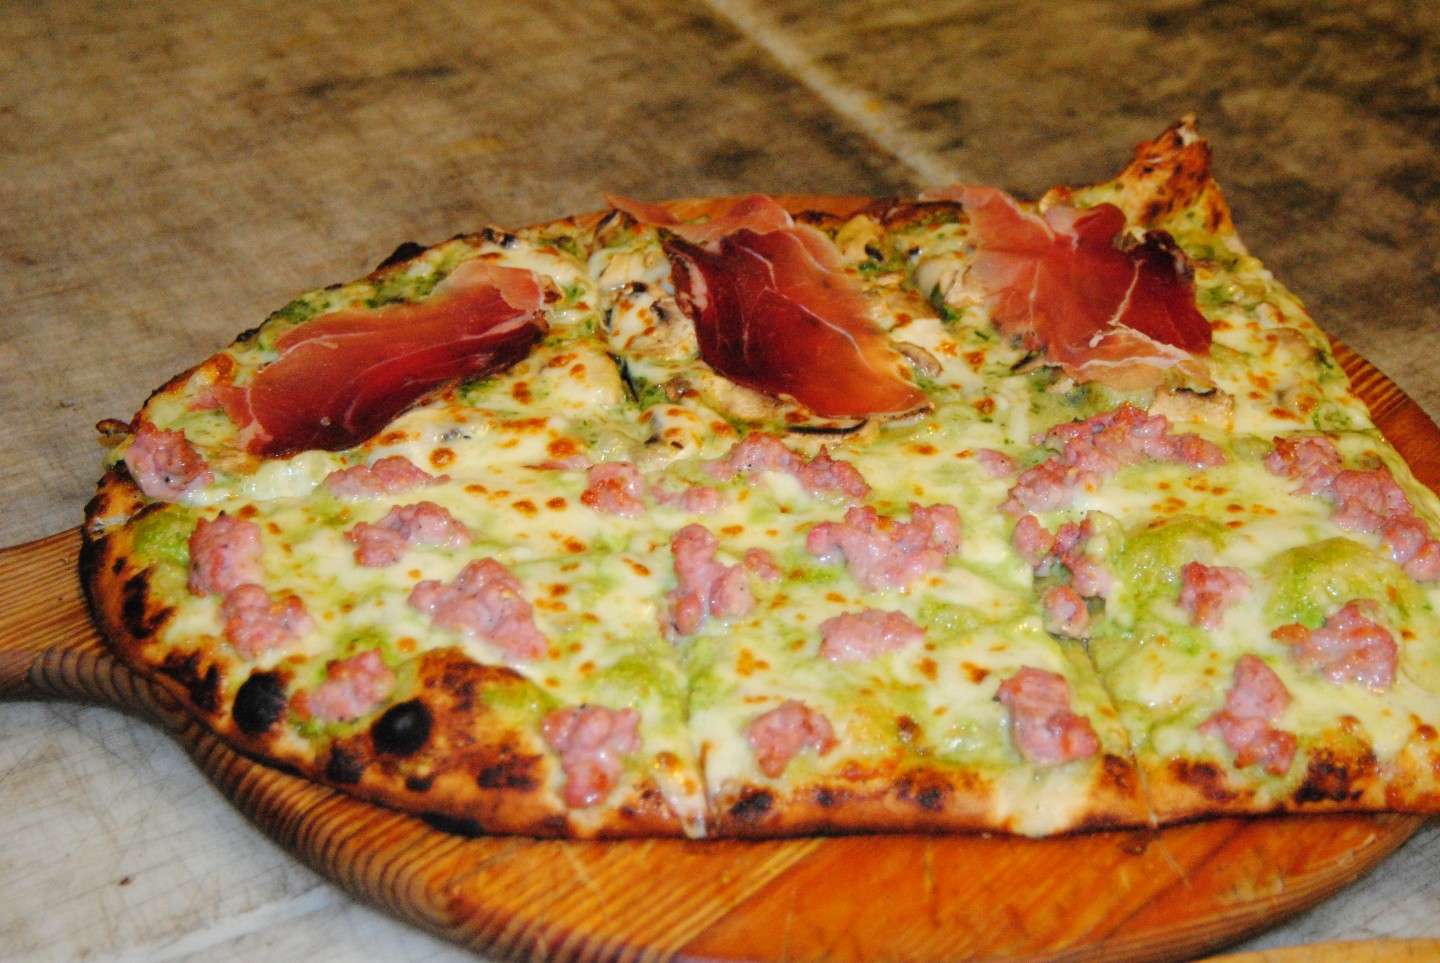 Pizza speck